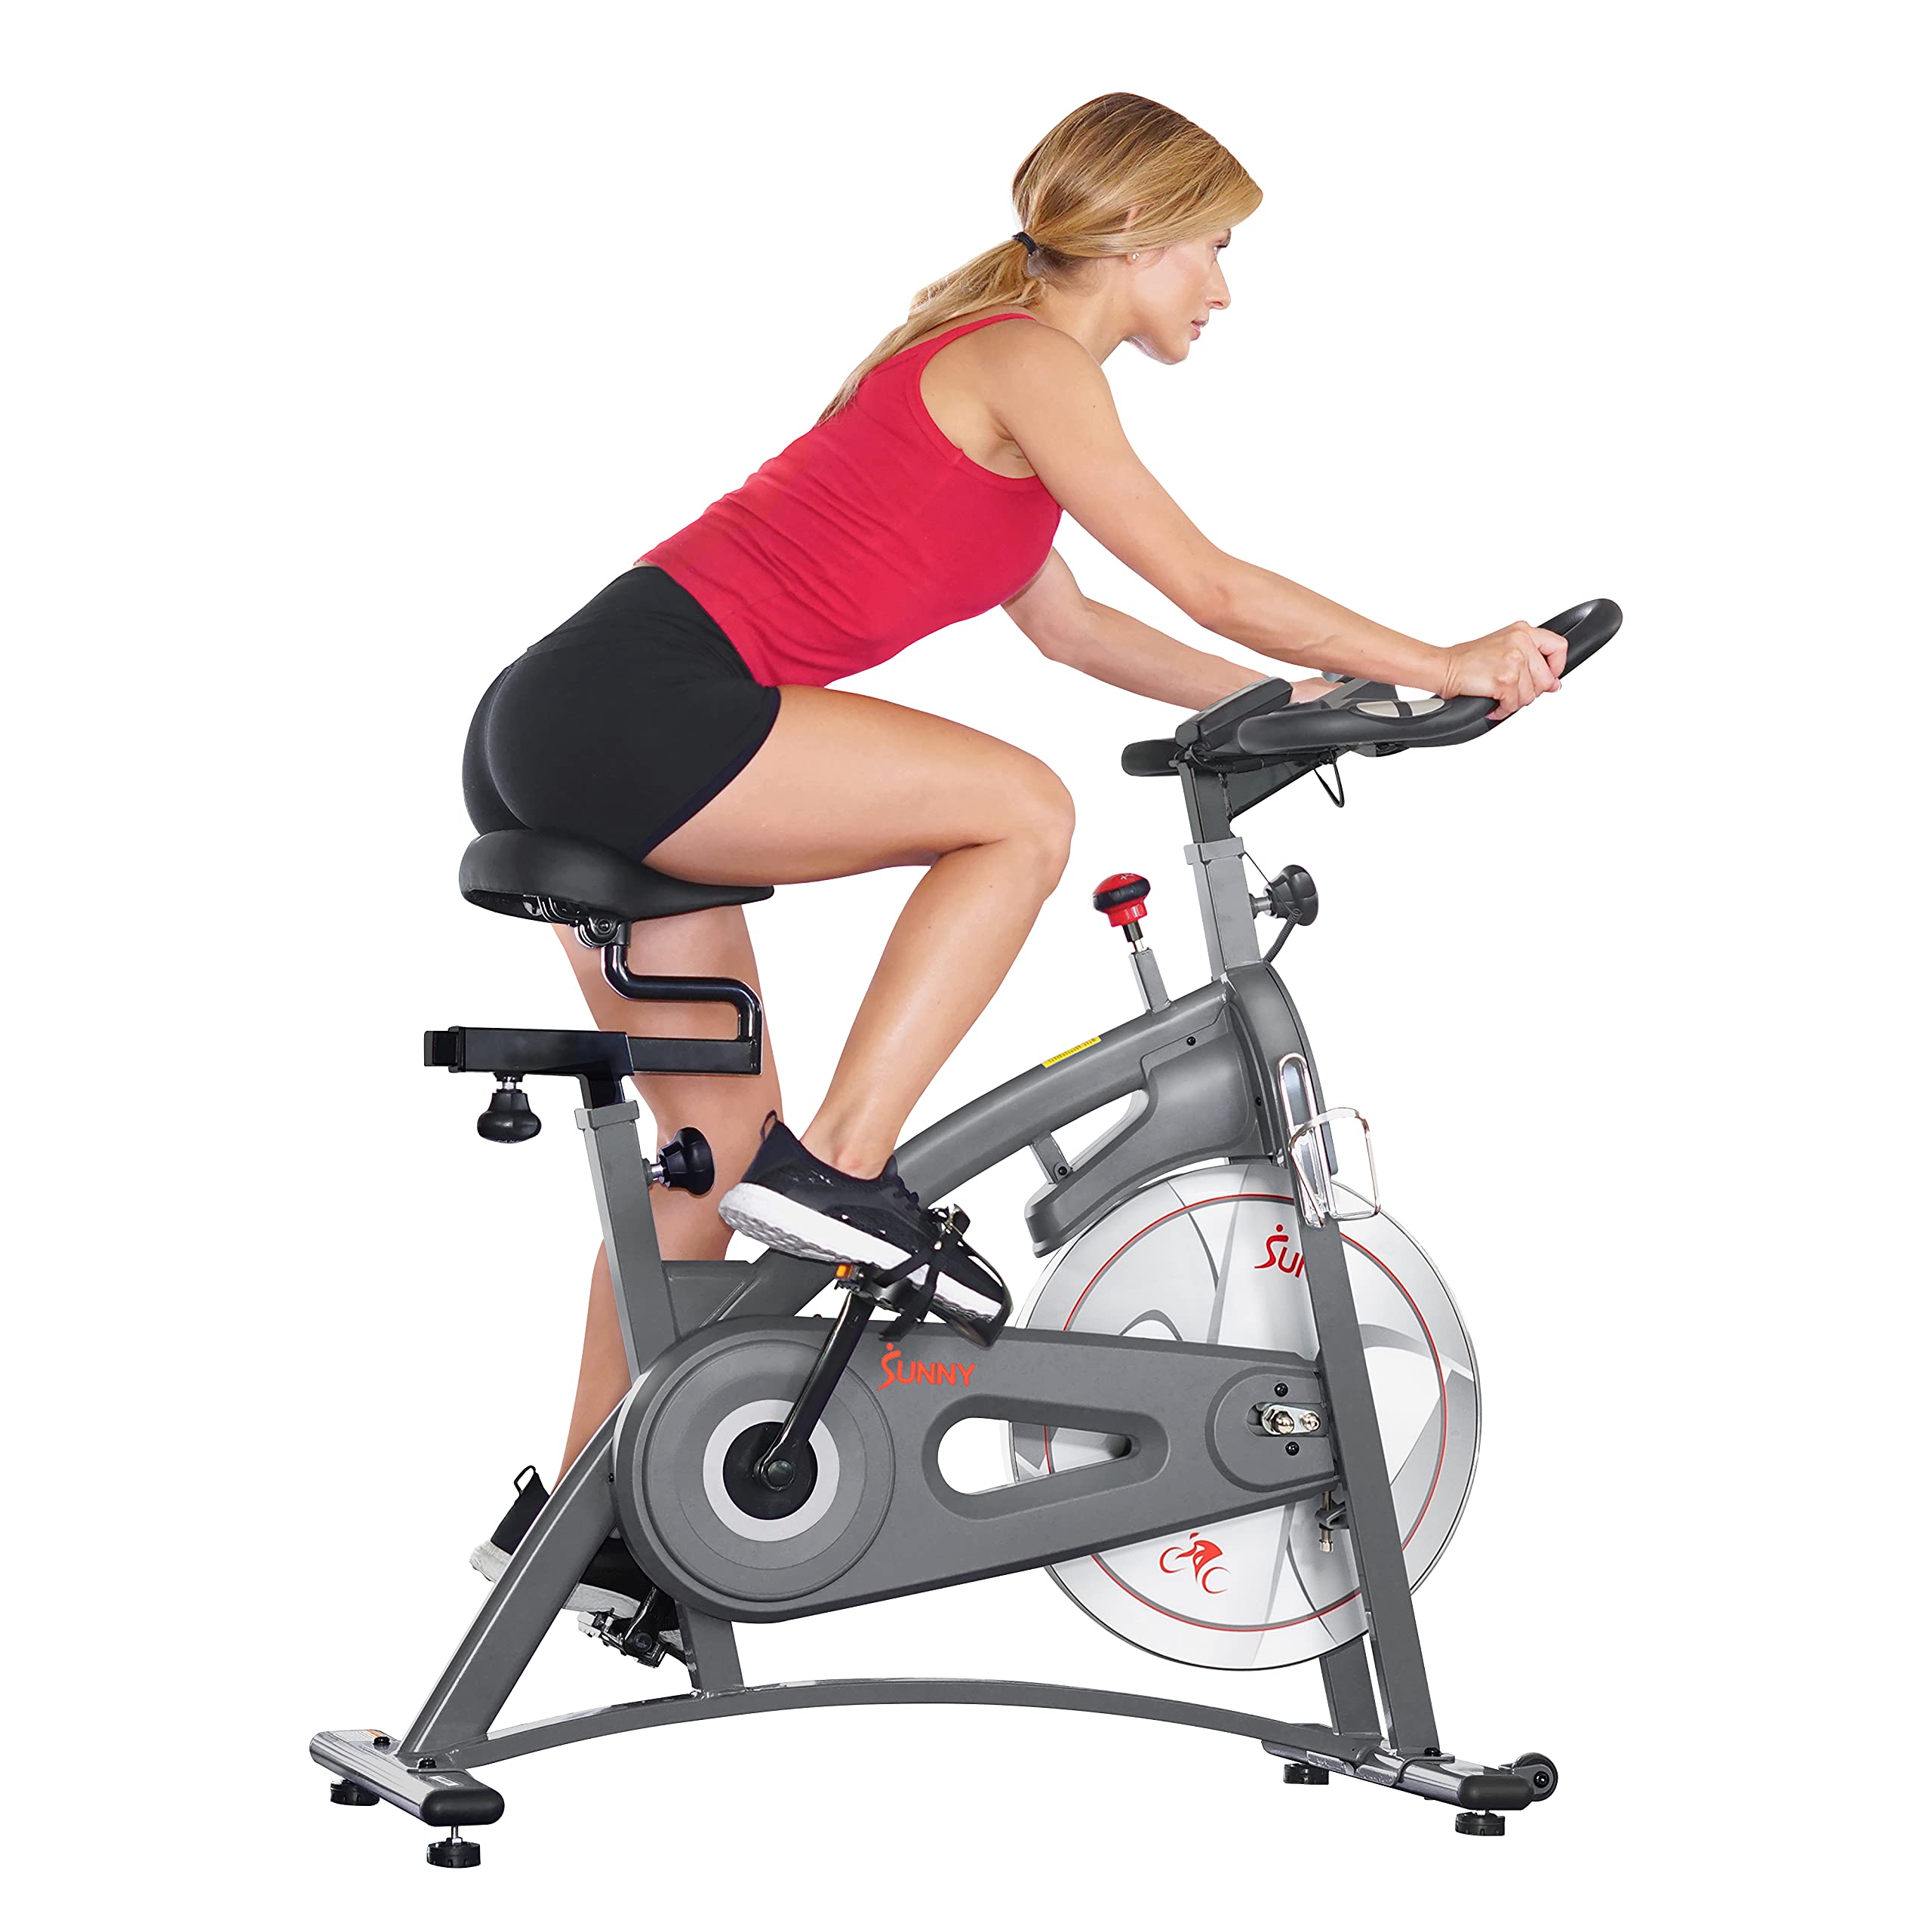 Sunny Health & Fitness Magnetic Resistance Endurance Indoor Cycling Exercise Bike w/ Optional Exclusive SunnyFit® App and Smart Bluetooth (B1877) $167.35 + Free Shipping